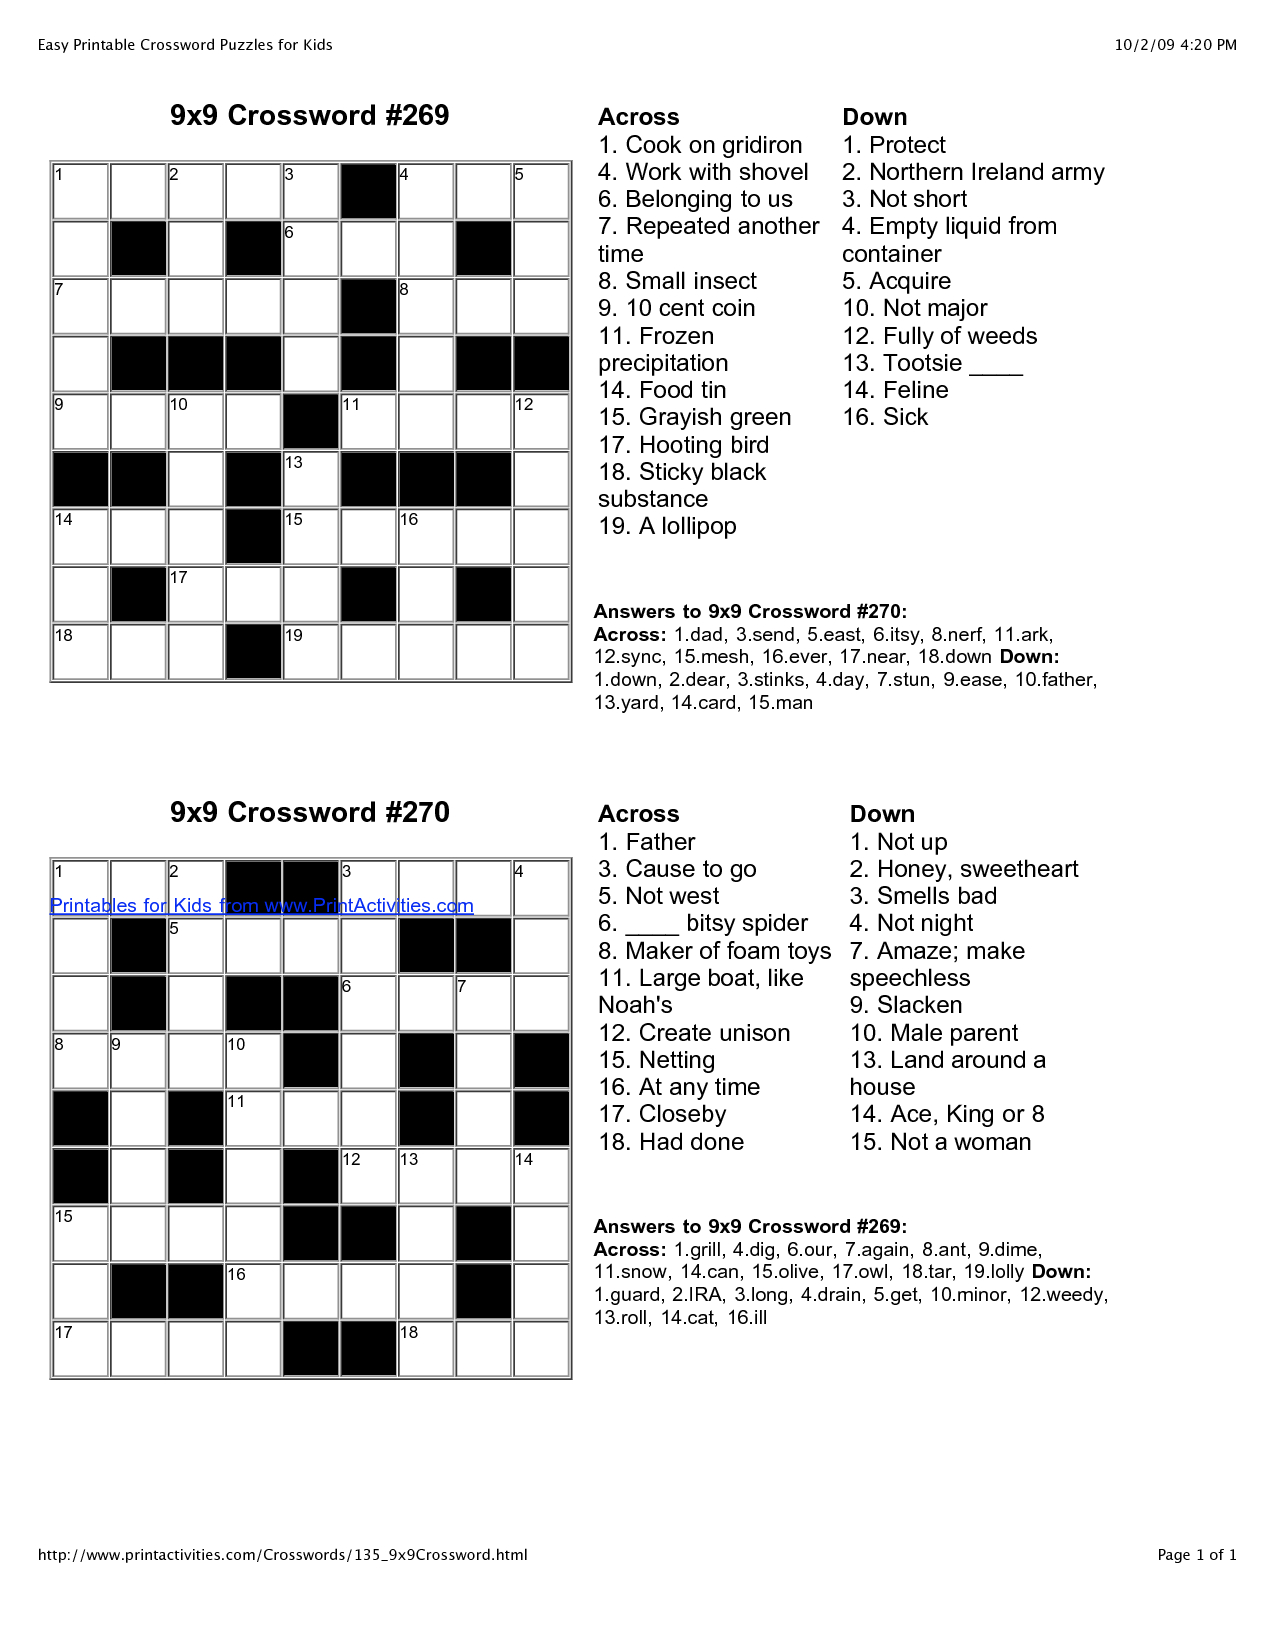 Easy Crossword Puzzles | I'm Going To Be An Slp! | Kids Crossword - Printable Puzzles To Do At Work